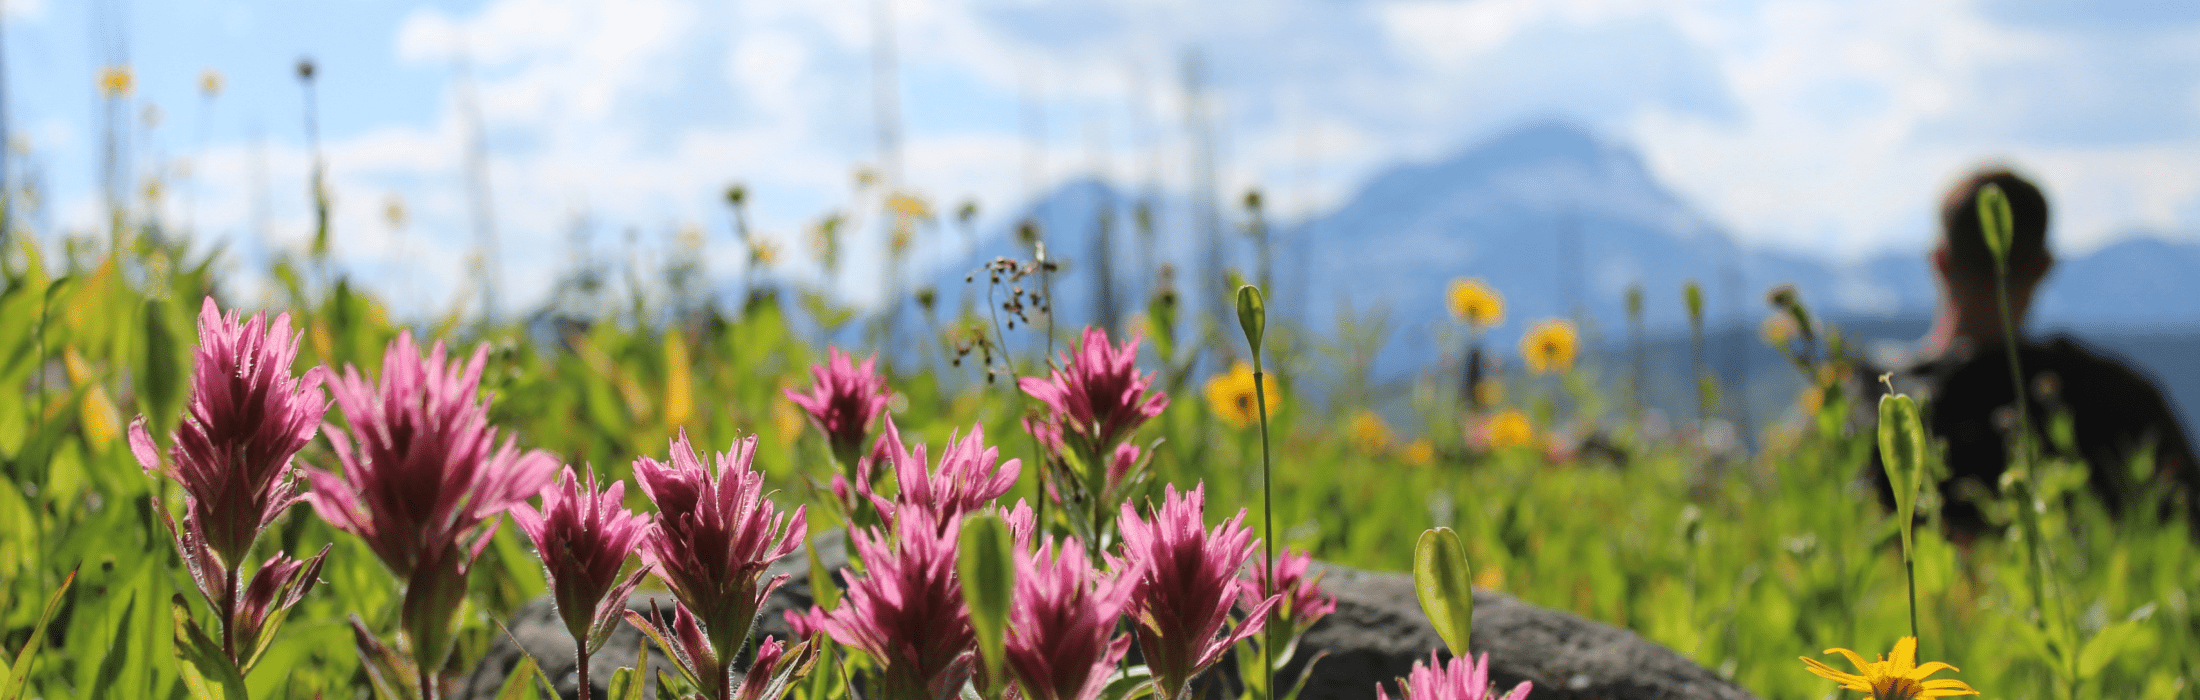 flowers in a field with mountain